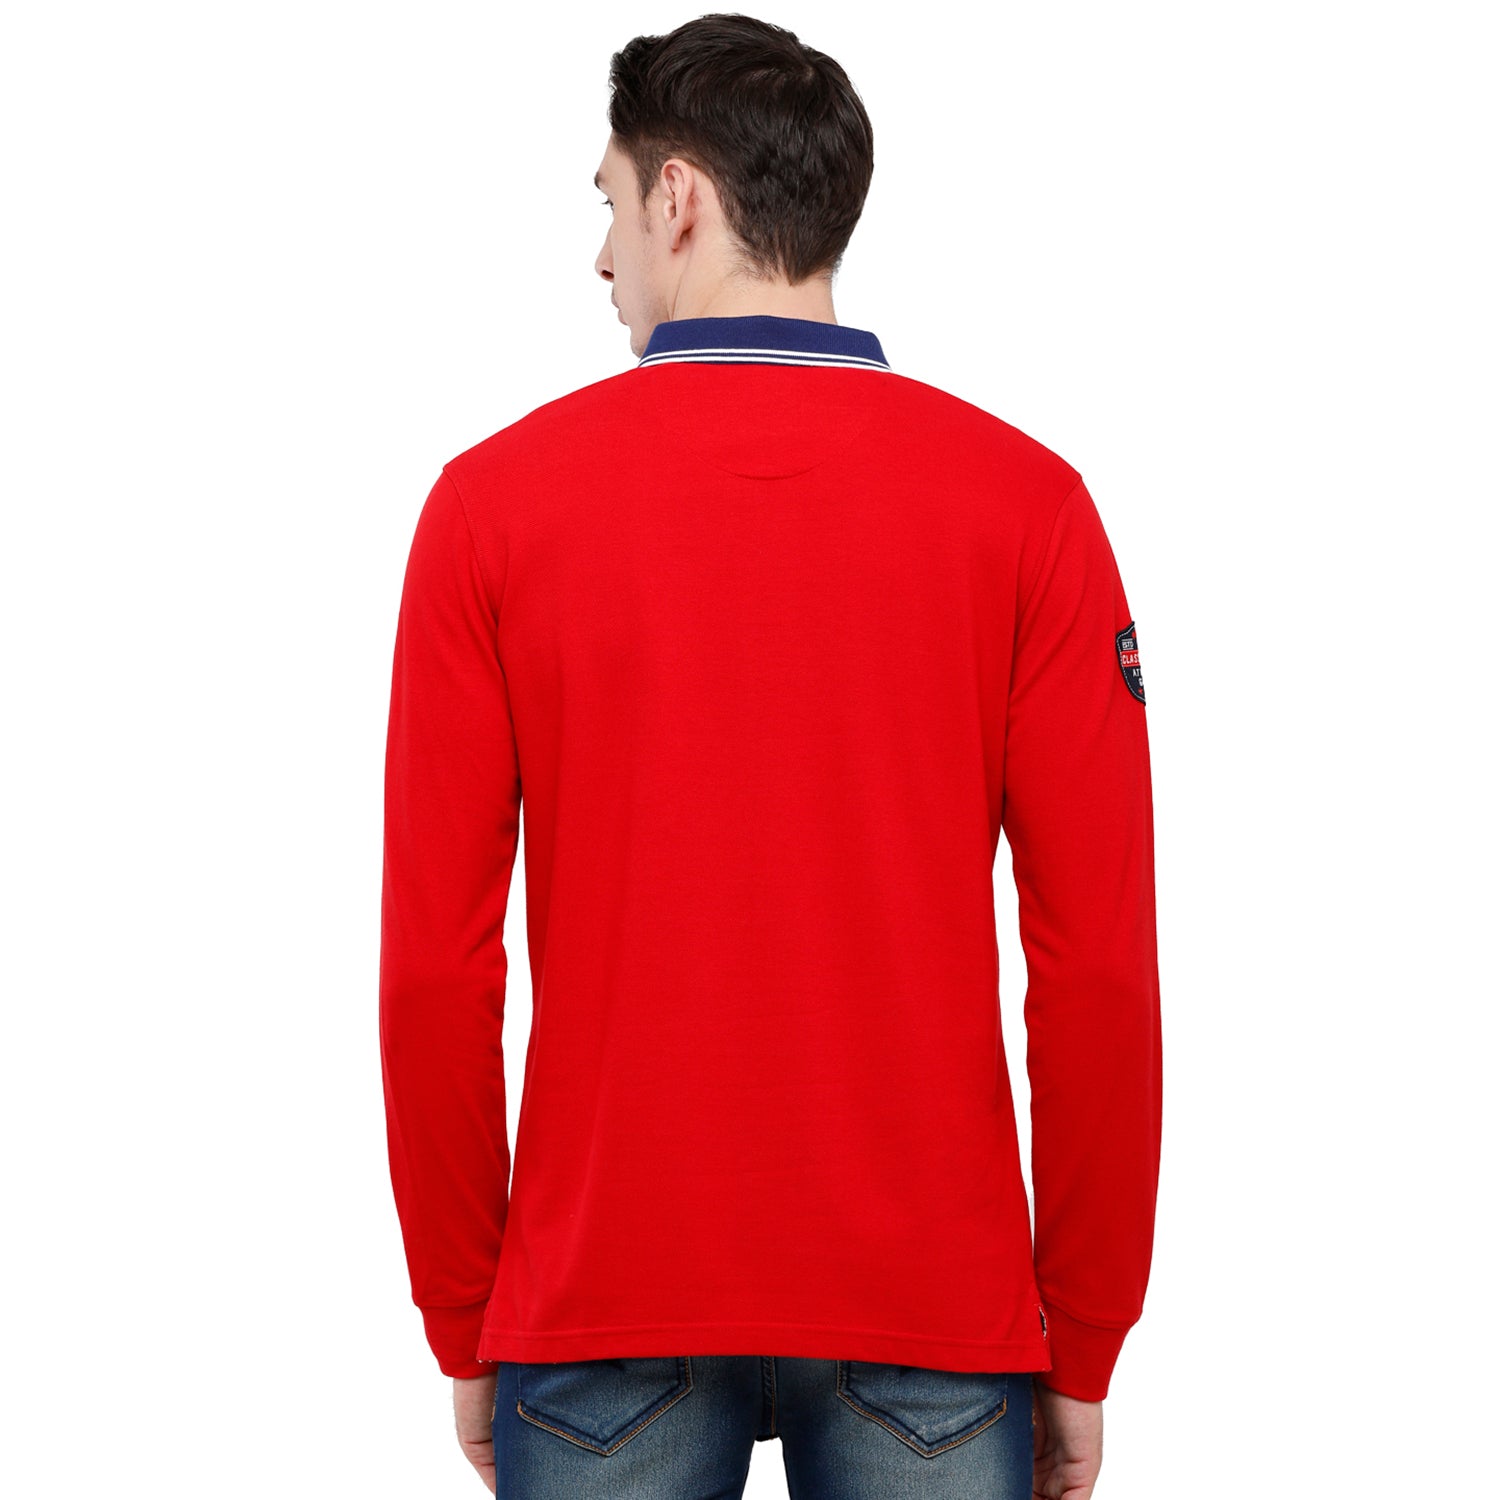 Classic Polo Men's Red Polo Full Sleeve Slim Fit T-Shirt - VERNO - 254 A SF P T-shirt Classic Polo 